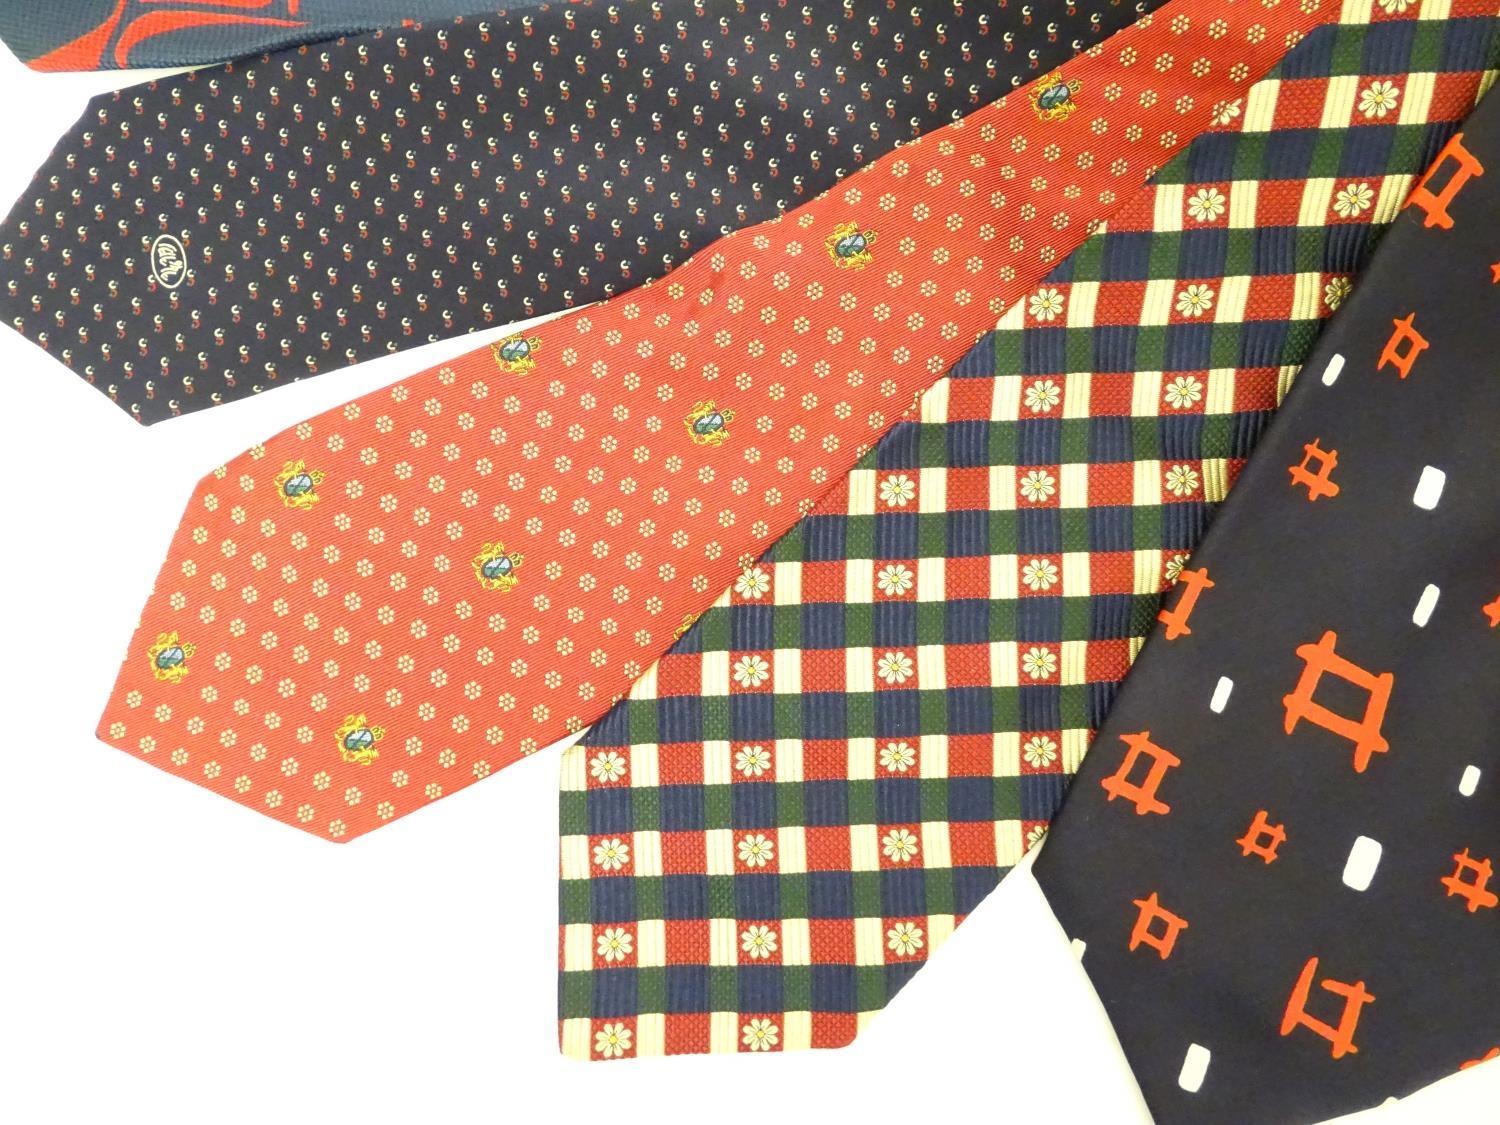 6 silk ties in navy and reds by Austin Reed, Tittorio, Pink and John Harmer (6) Please Note - we - Image 4 of 9